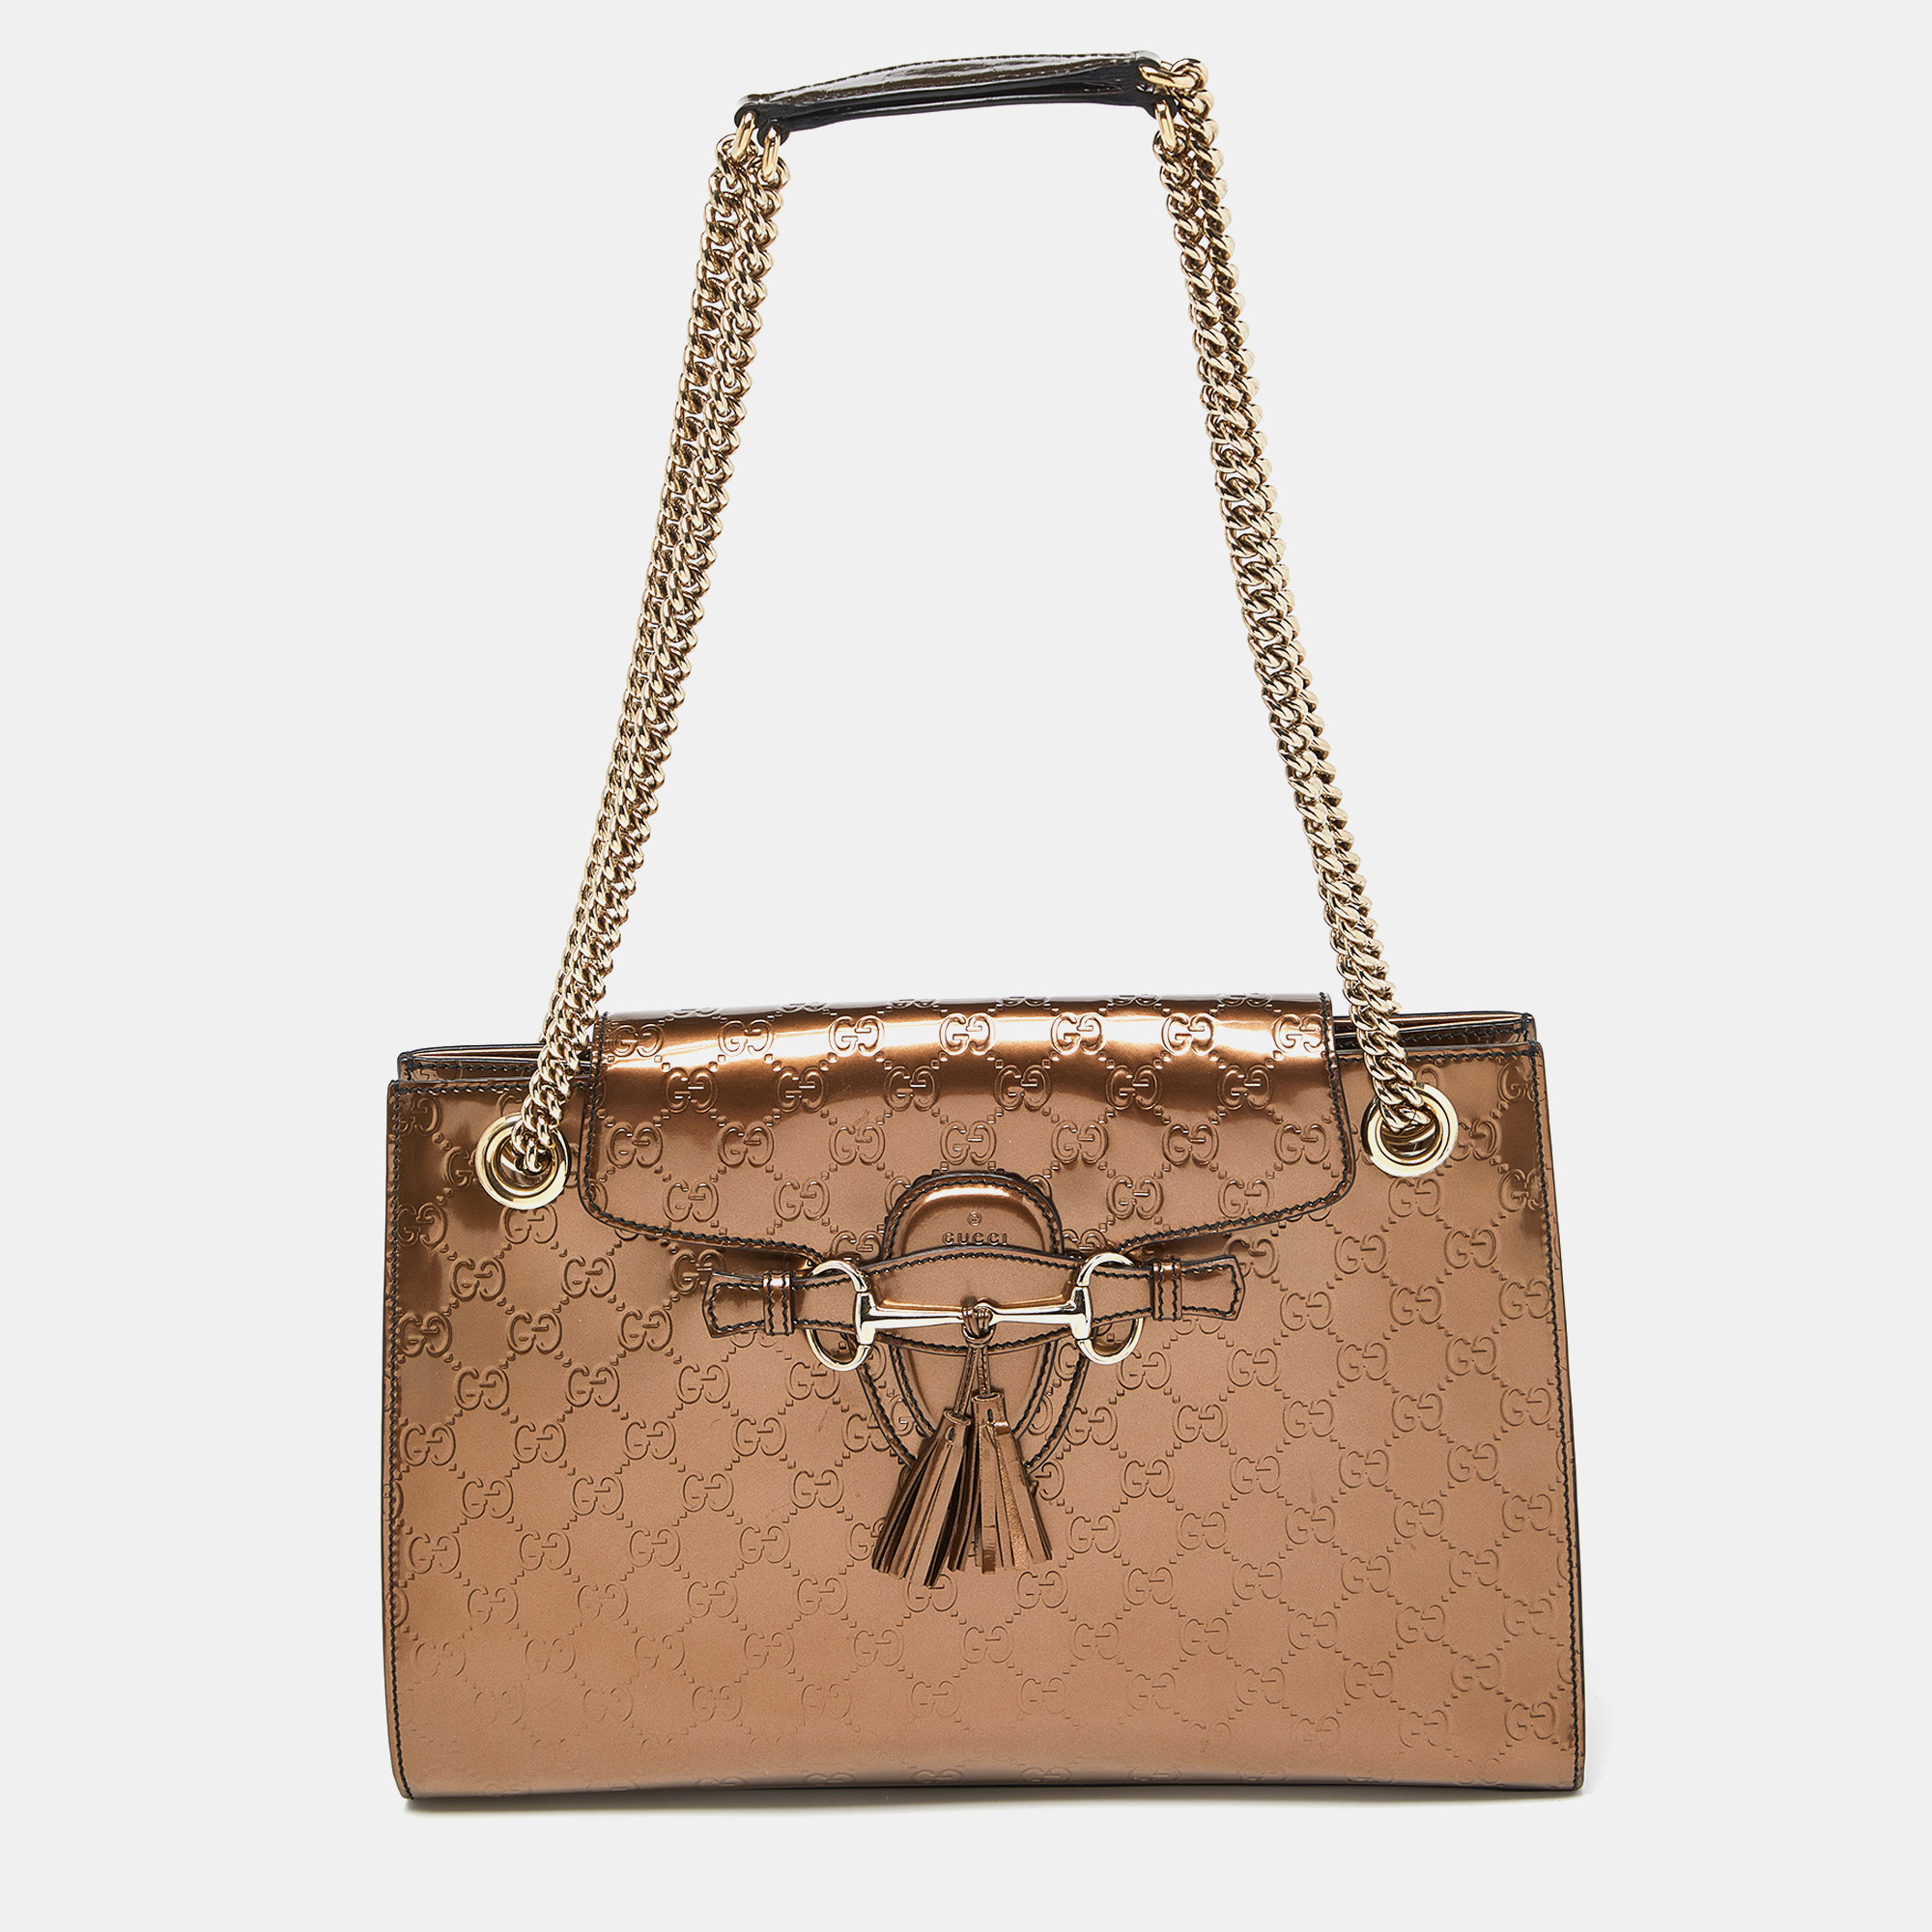 Gucci brown guccissima patent leather large emily shoulder bag